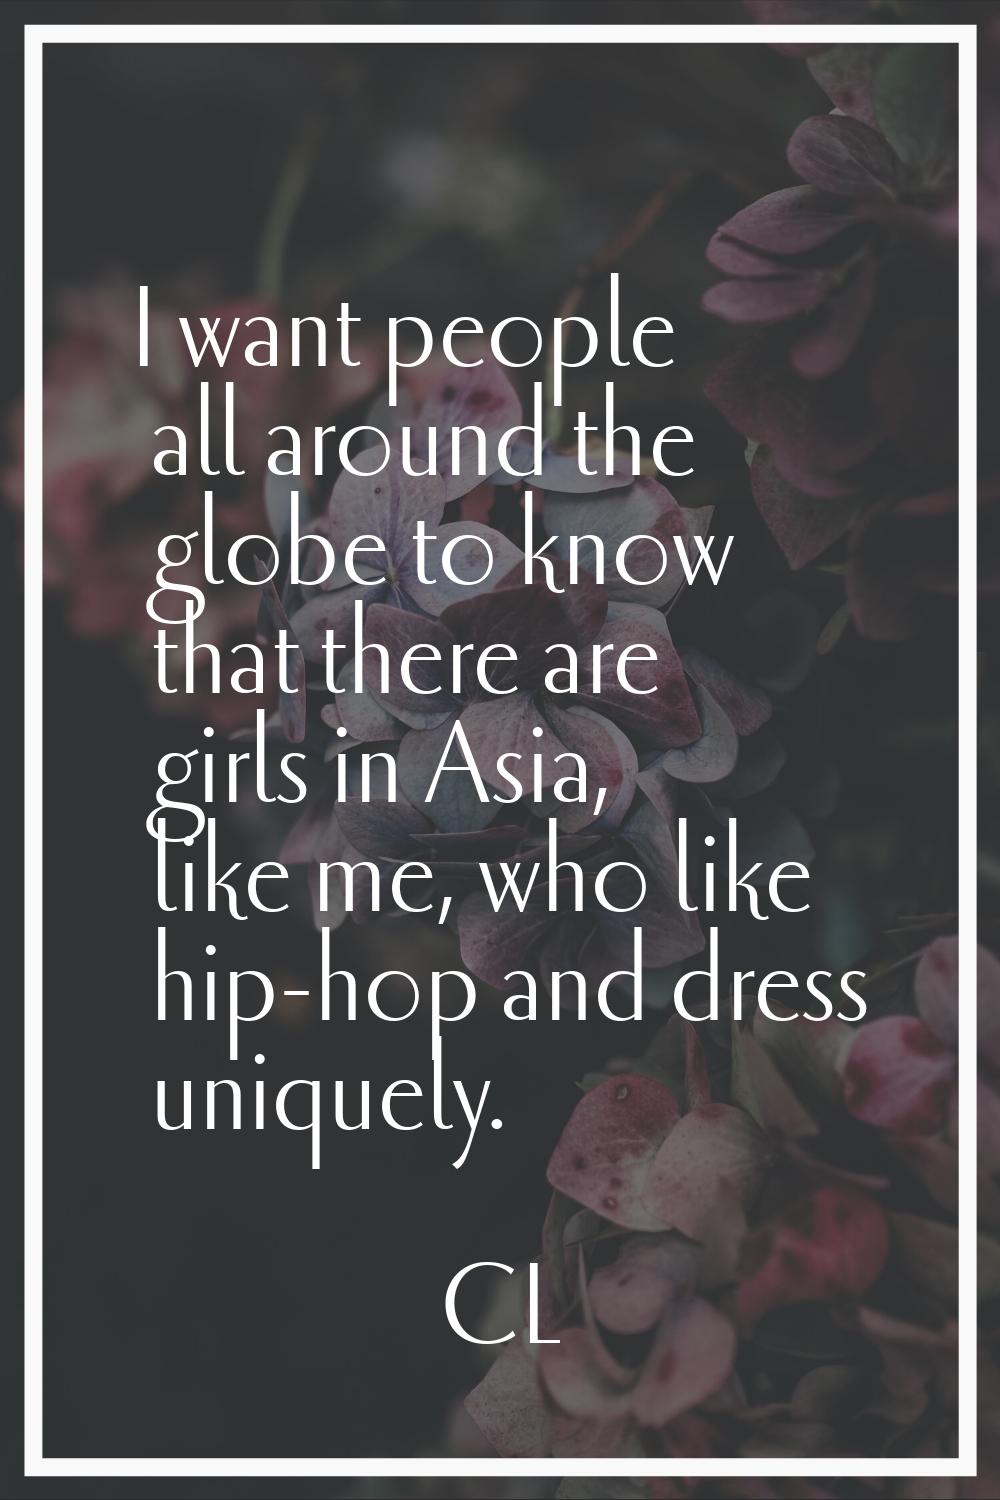 I want people all around the globe to know that there are girls in Asia, like me, who like hip-hop 